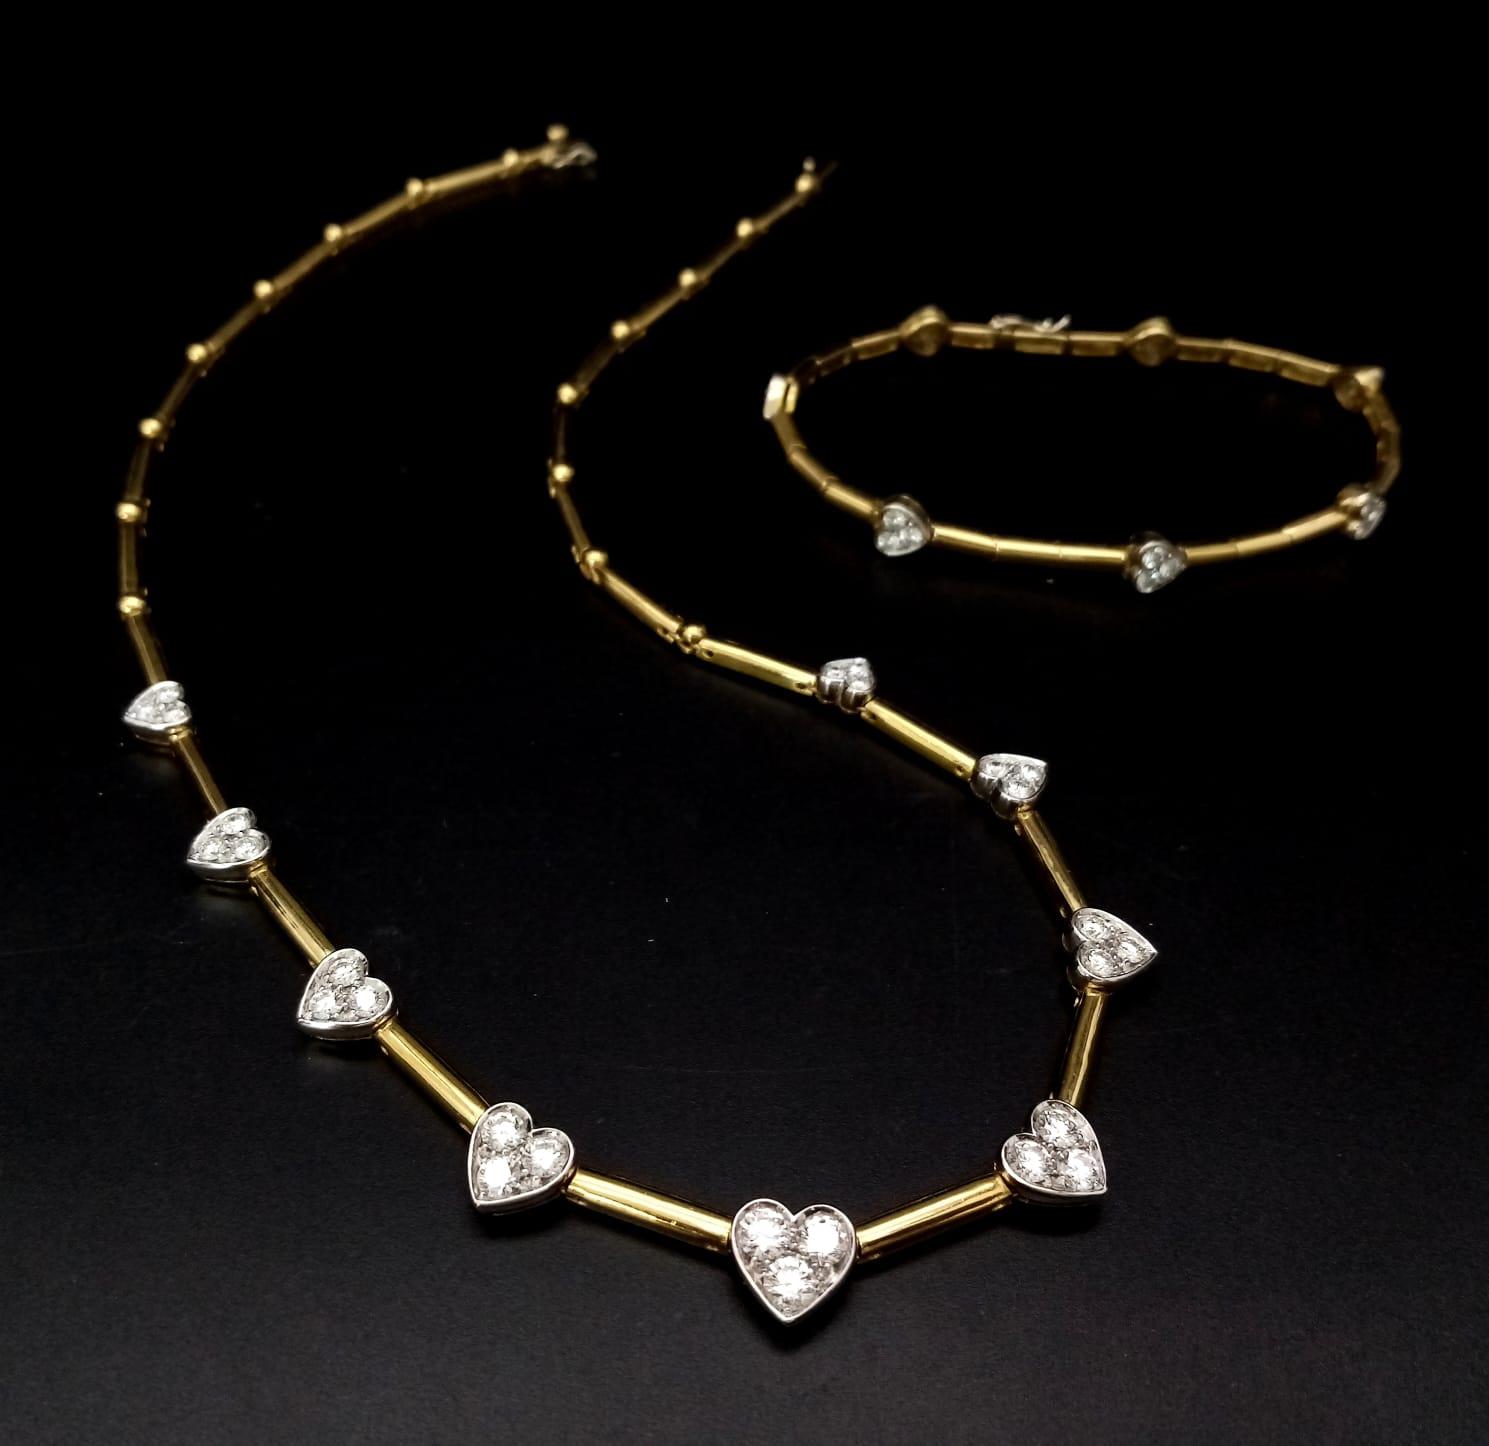 A Gorgeous 18K Gold and Heart-Diamond Necklace and Bracelet Set. The necklace is decorated with - Image 14 of 21